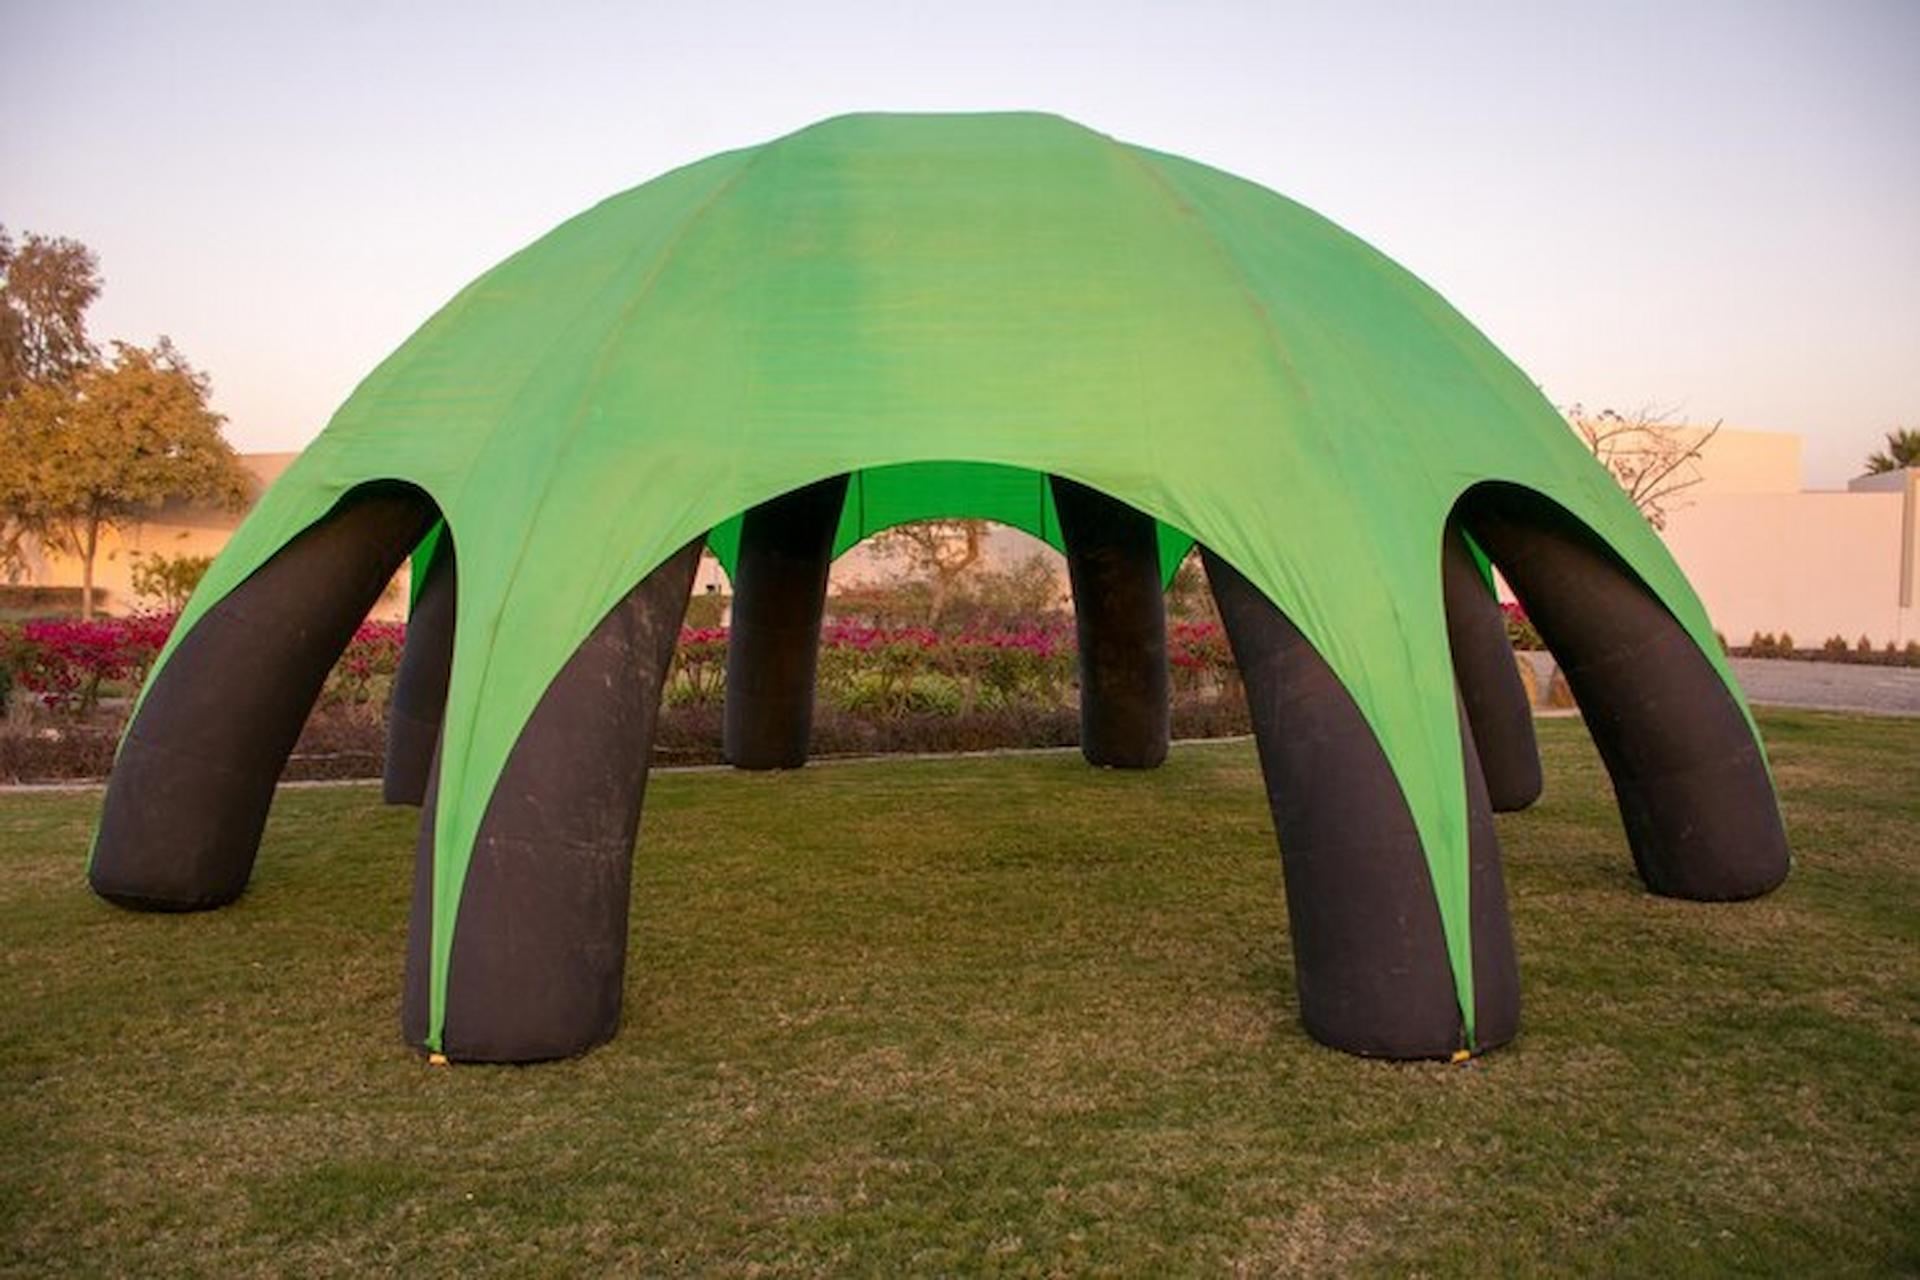 The Eco-Friendly Advantages of Inflatable Domes in Architecture